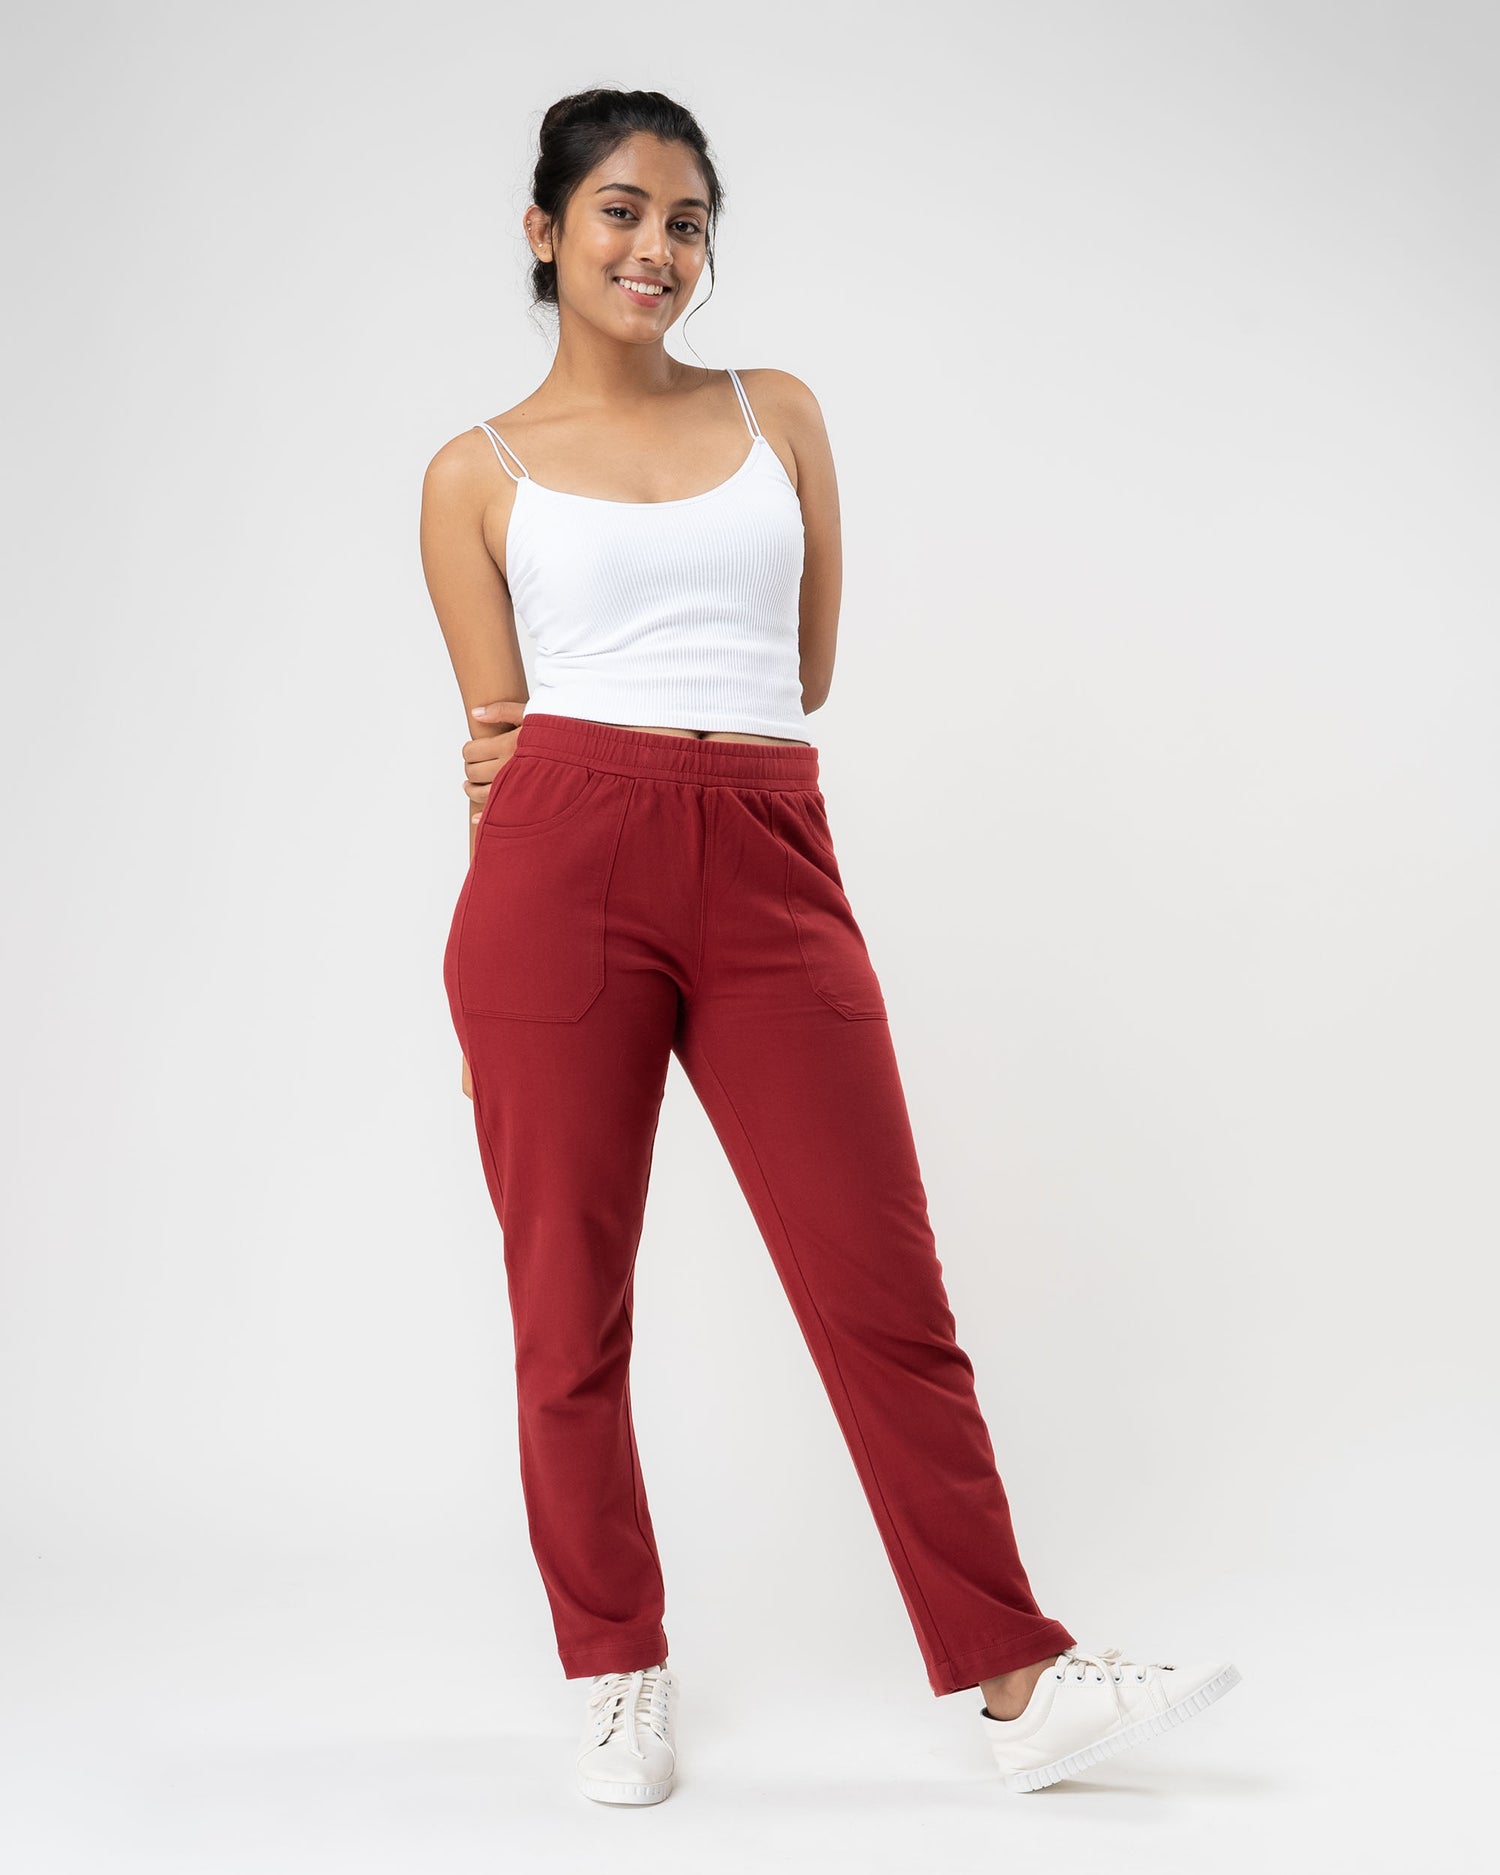 Red Cotton Comfort Pants For Women - Best Organic Pants – Cuttlefish